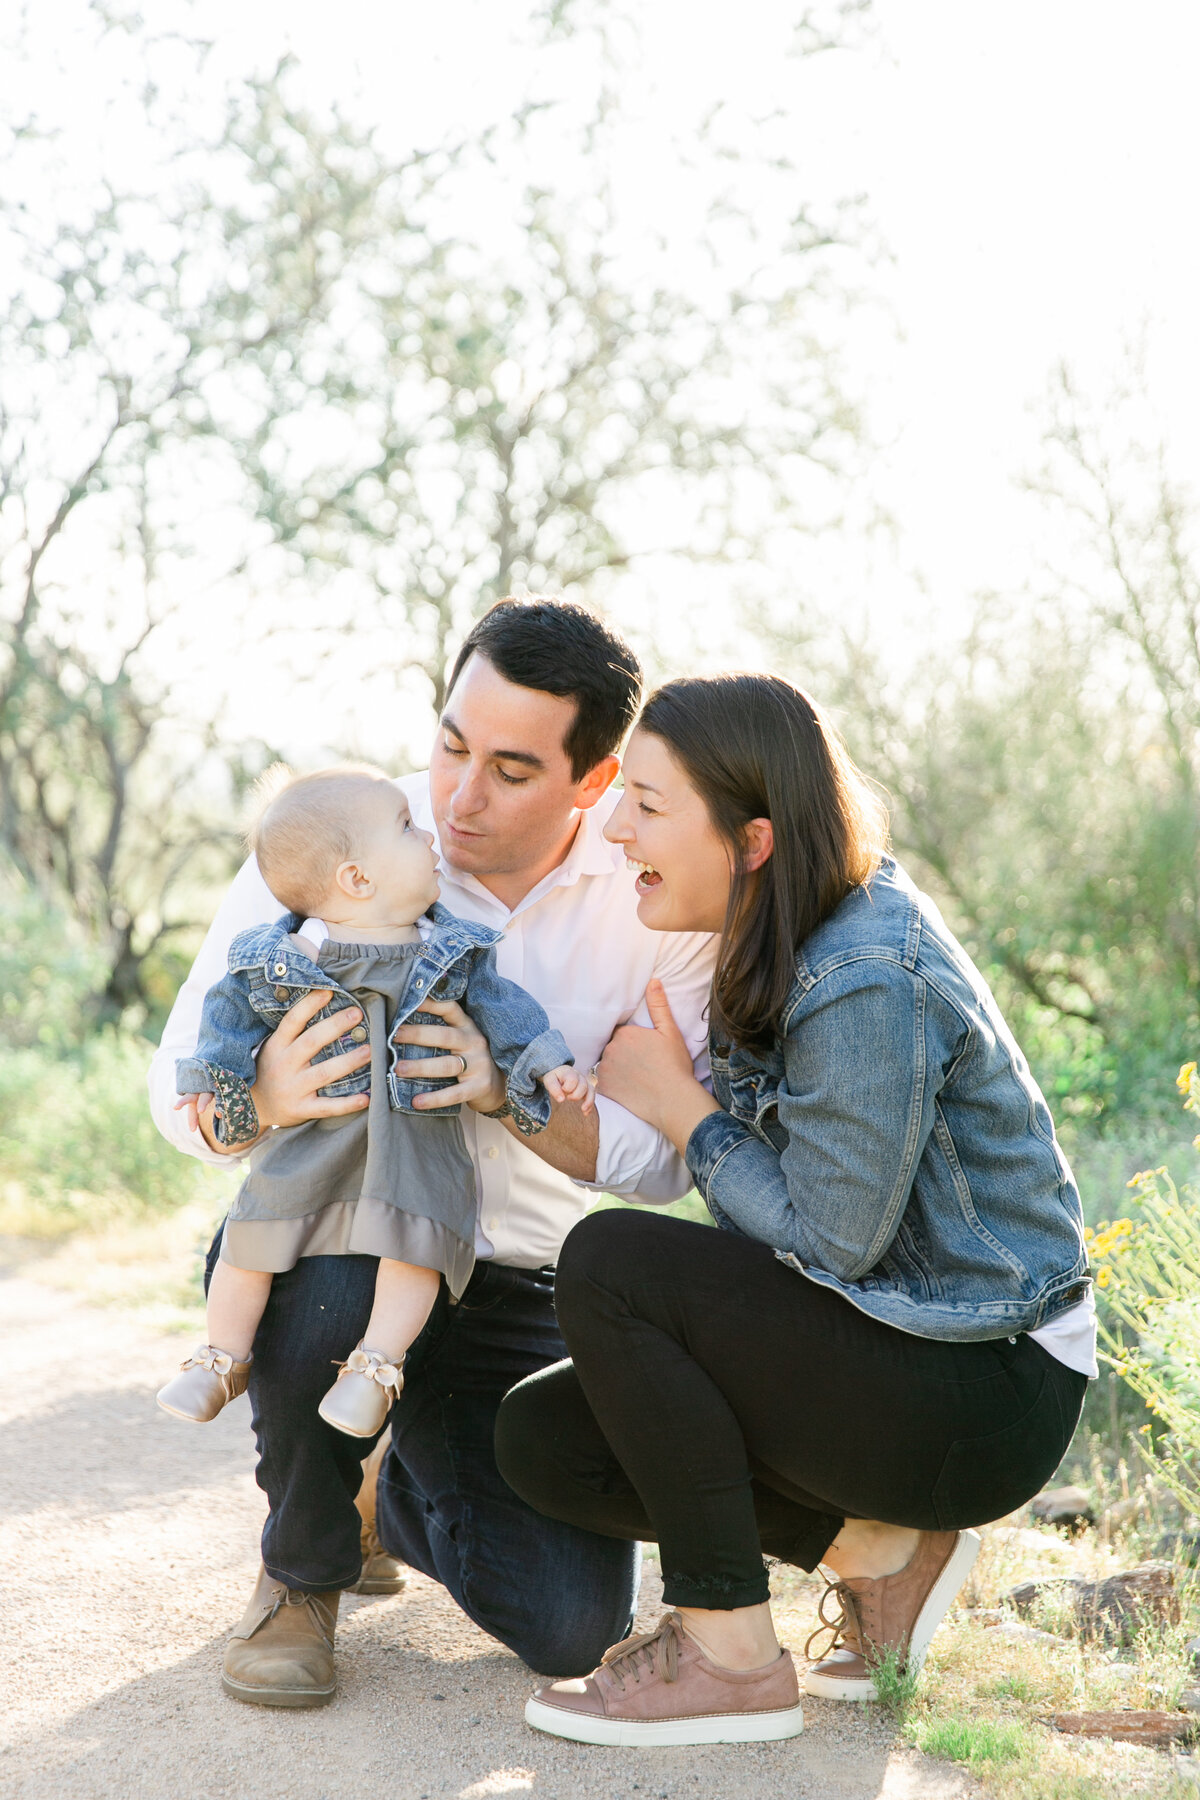 Karlie Colleen Photography - Scottsdale family photography - Victoria & family-13